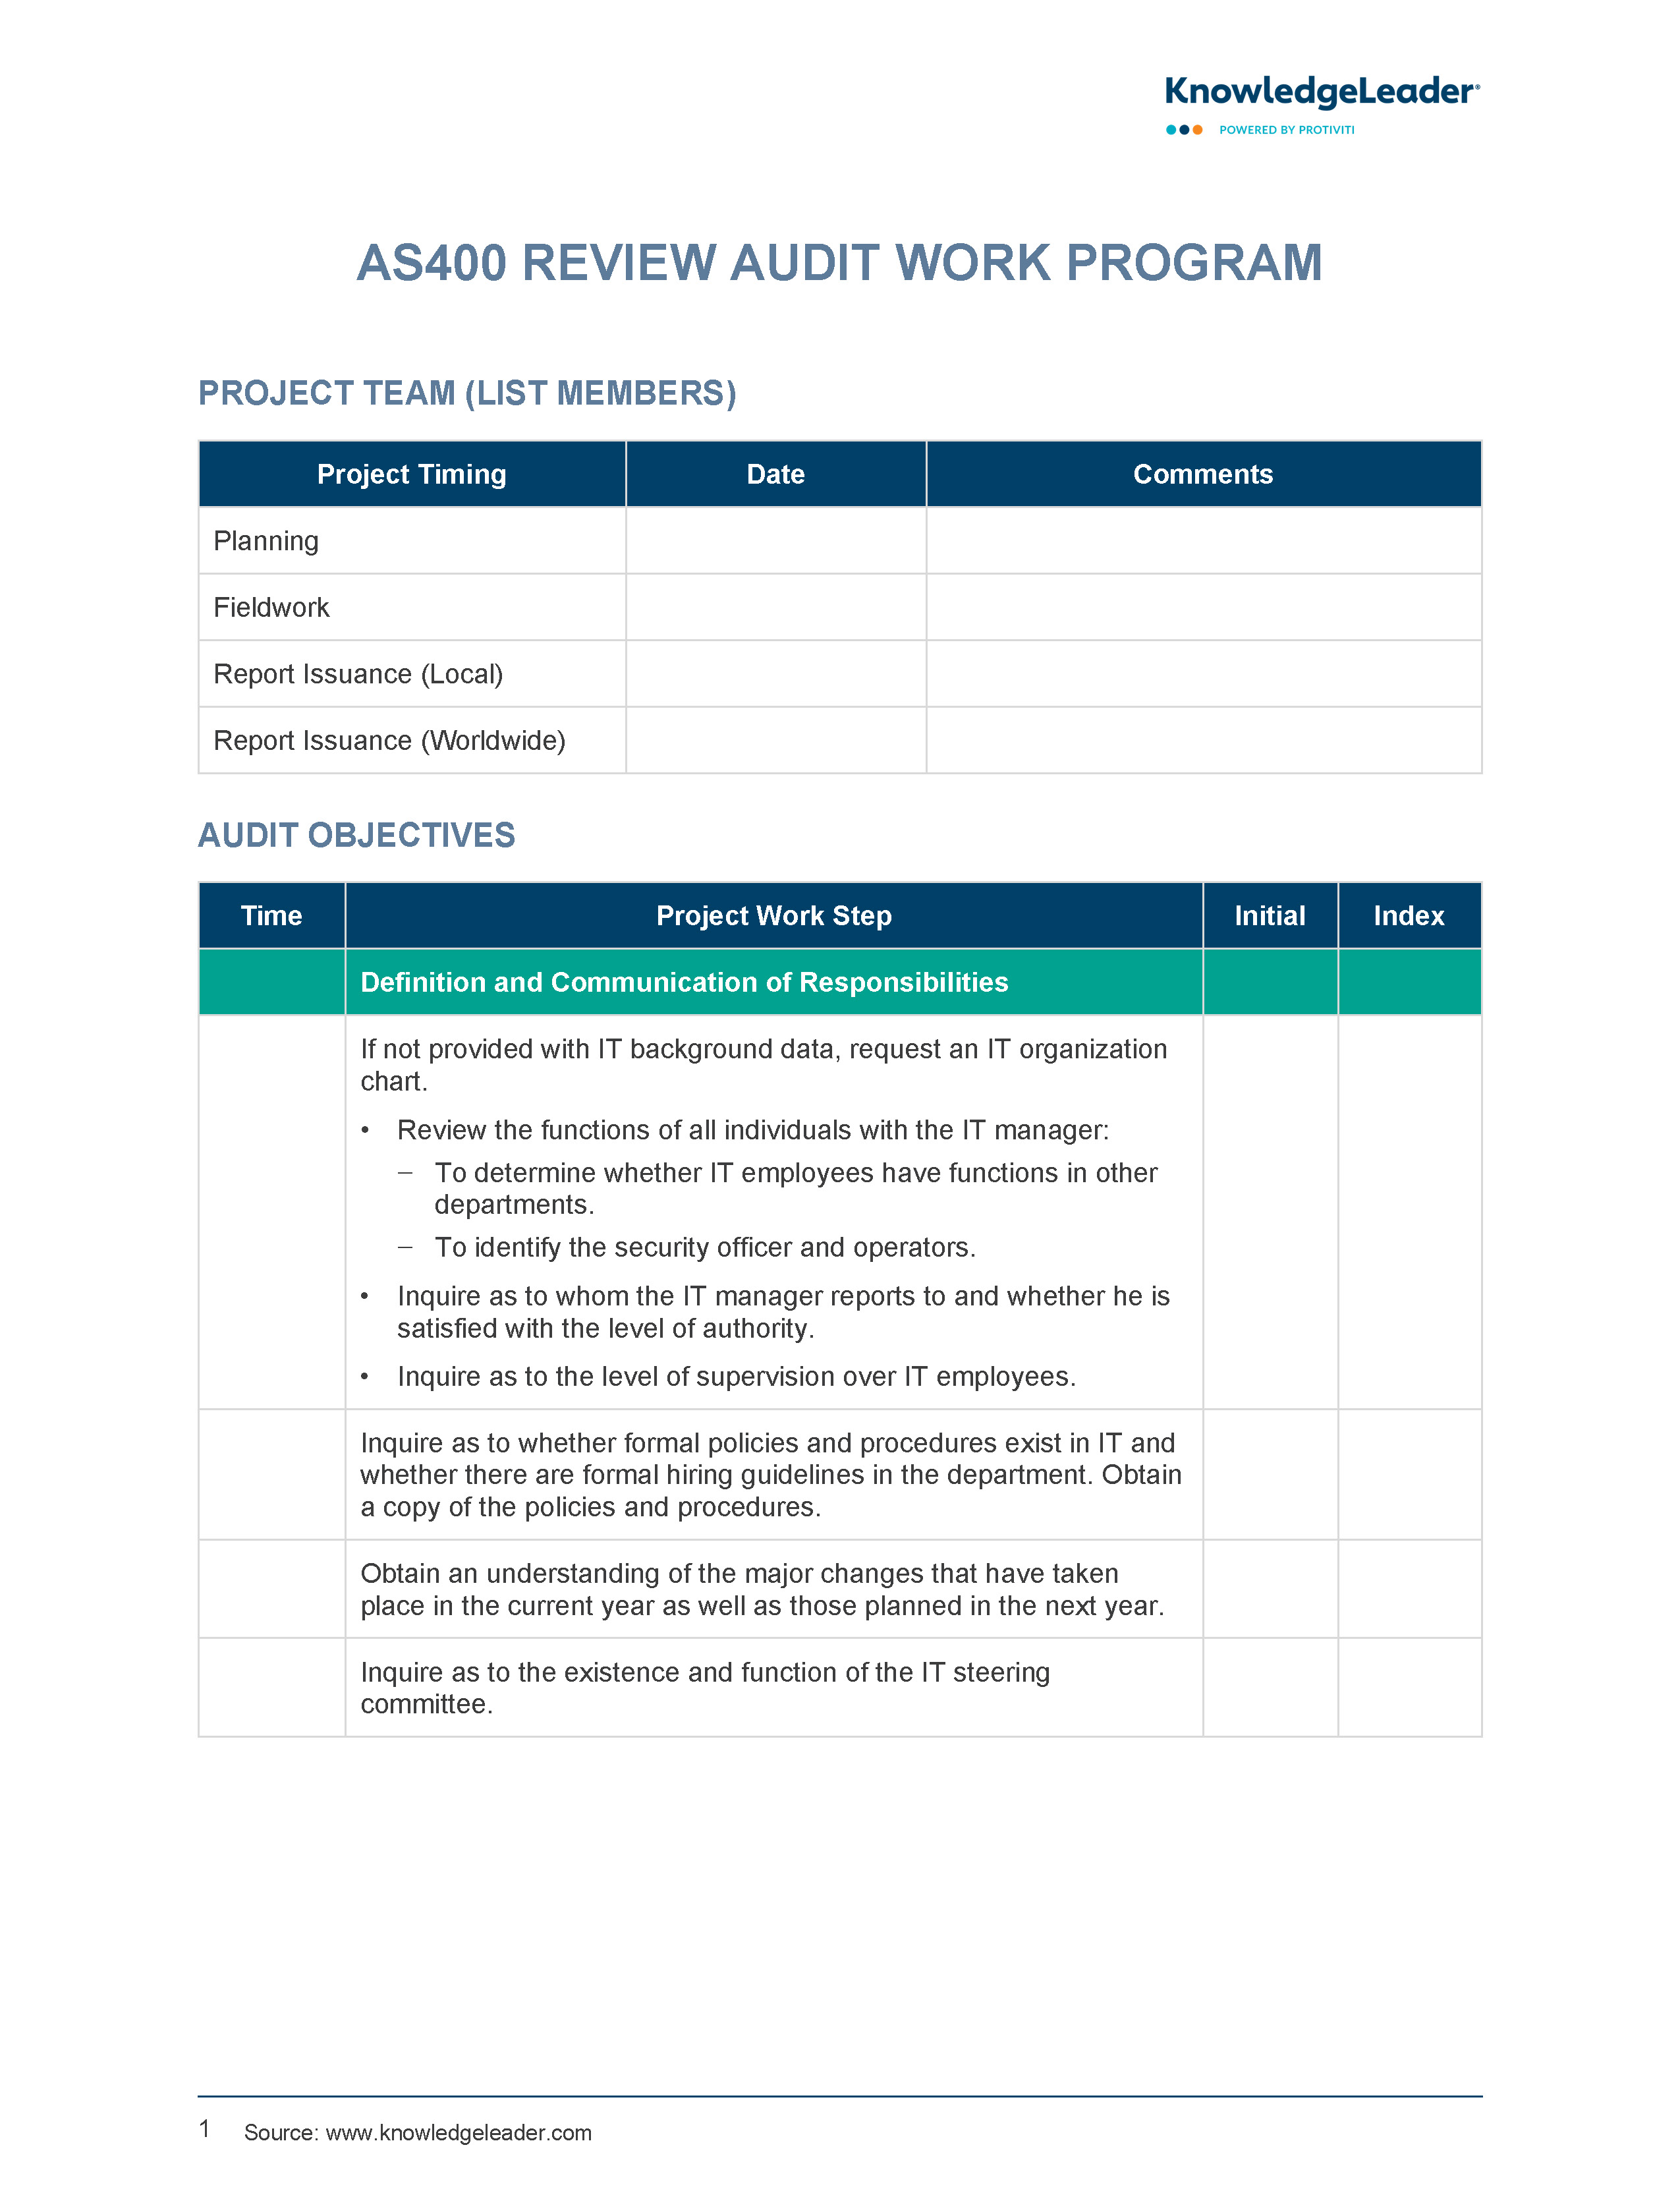 Screenshot of the first page of AS400 Review Audit Work Program